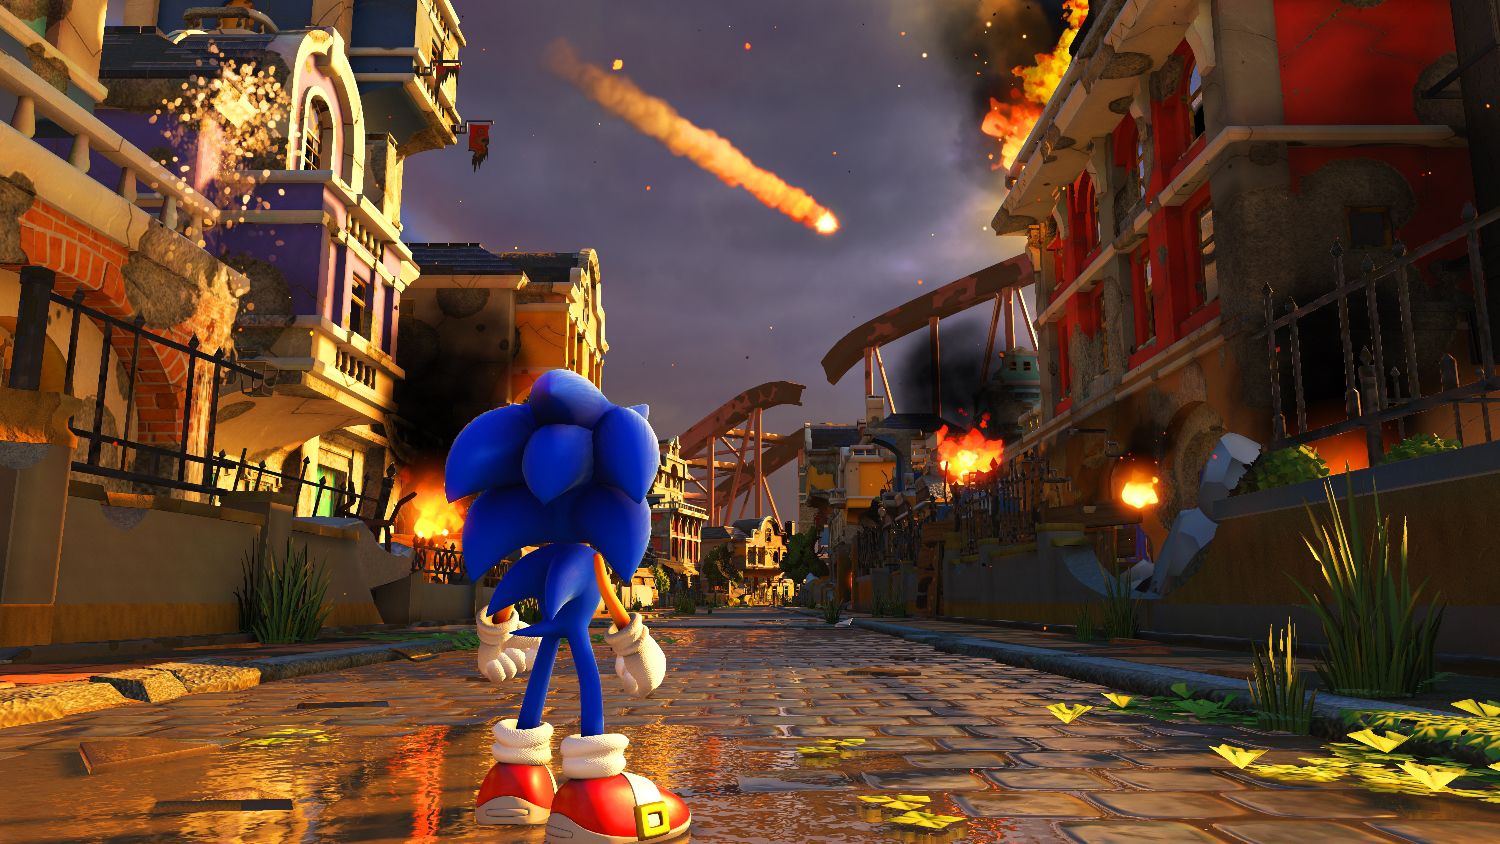 Sonic 2017's Official Title is Sonic Forces, Sonic Mania Delayed to Summer